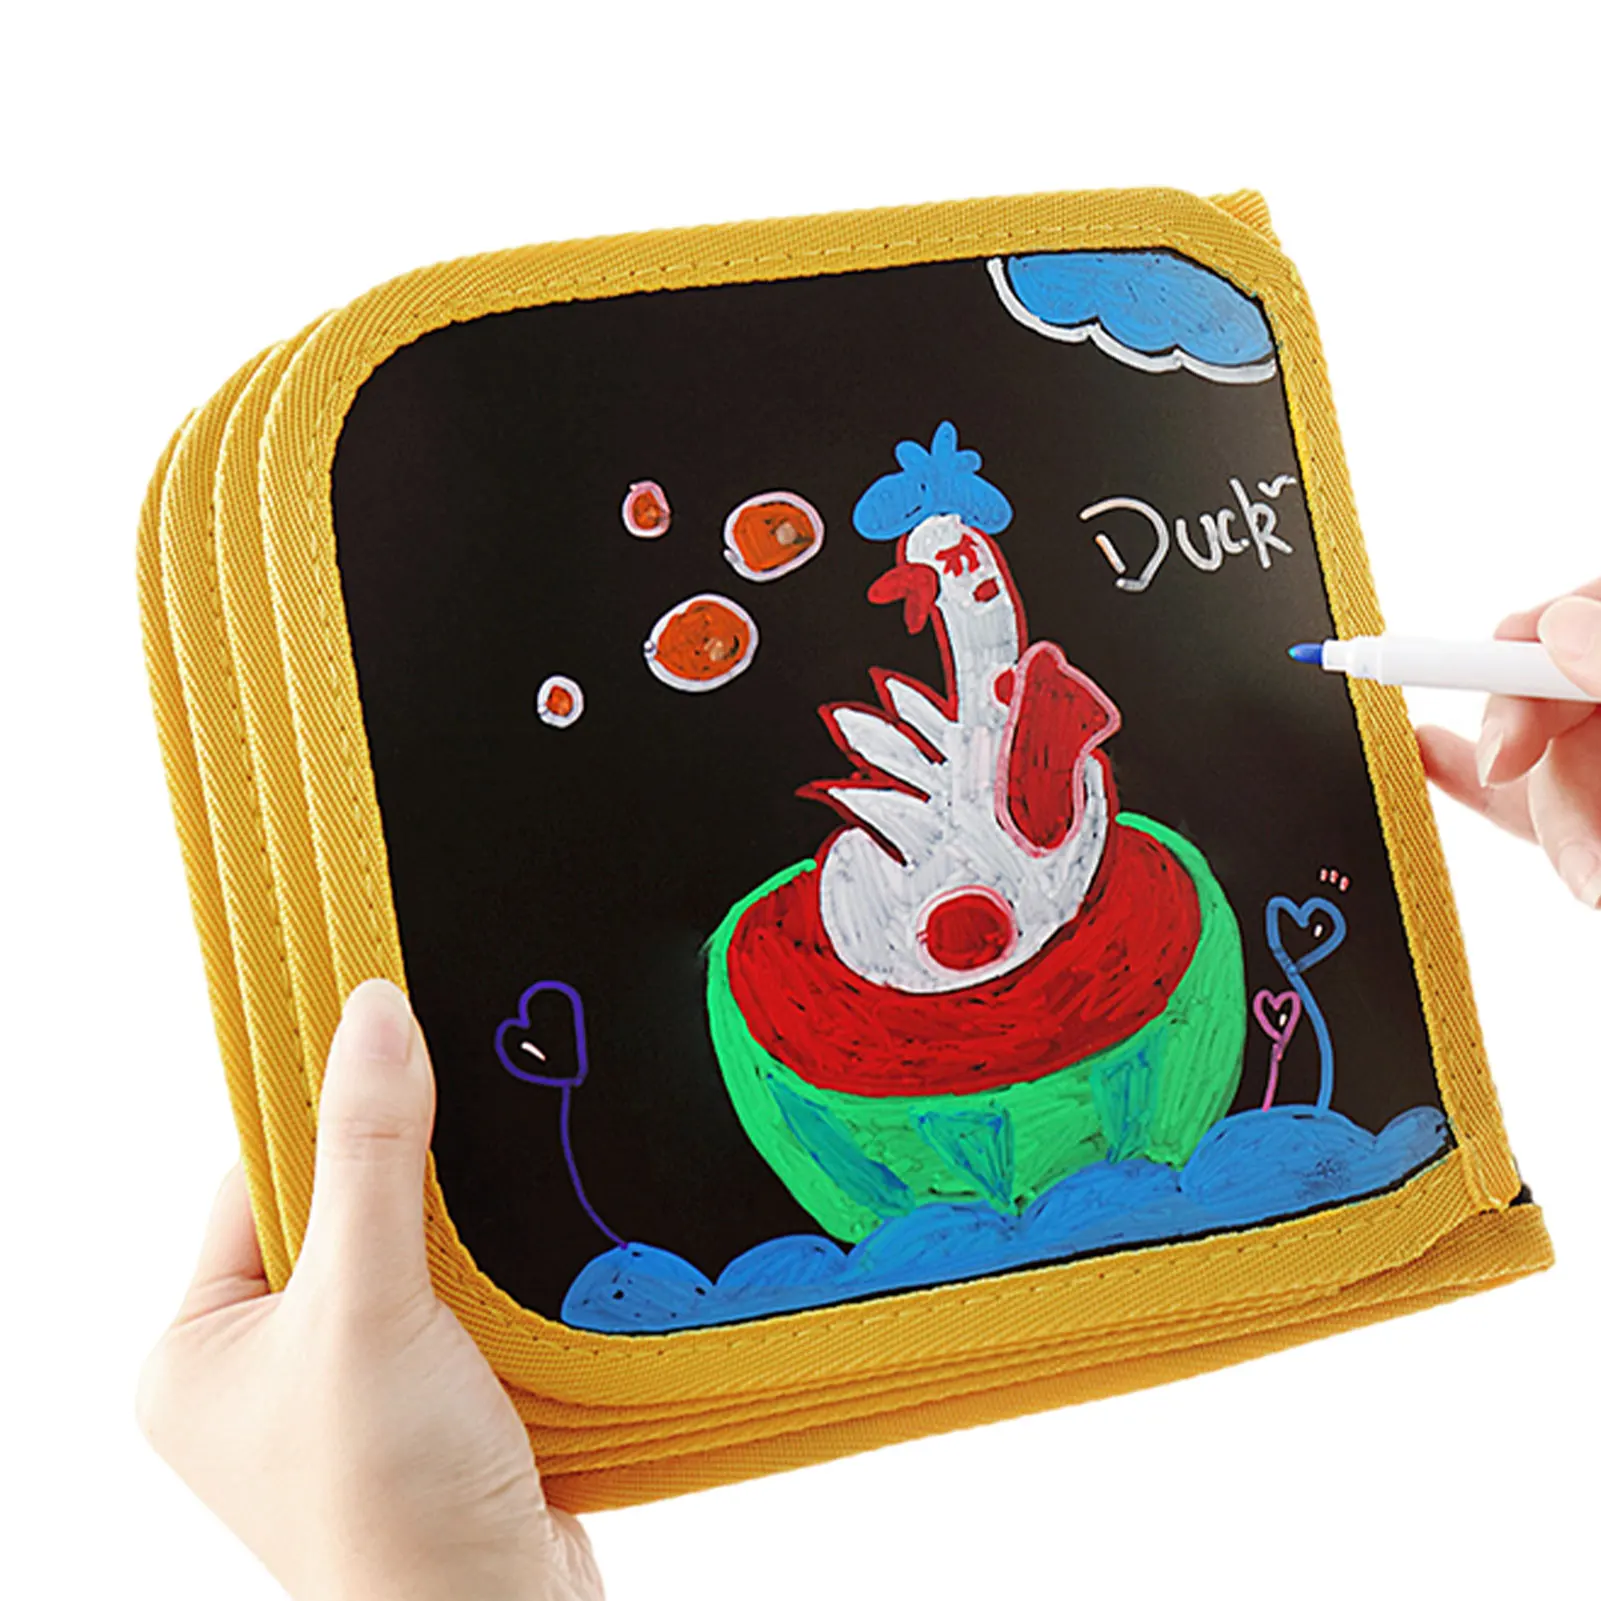 

Kids Erasable Doodle Book Set Reusable Drawing Pads Toddlers Activity Toys Preschool Scribbler Board Drawing Pads With 3 Colored